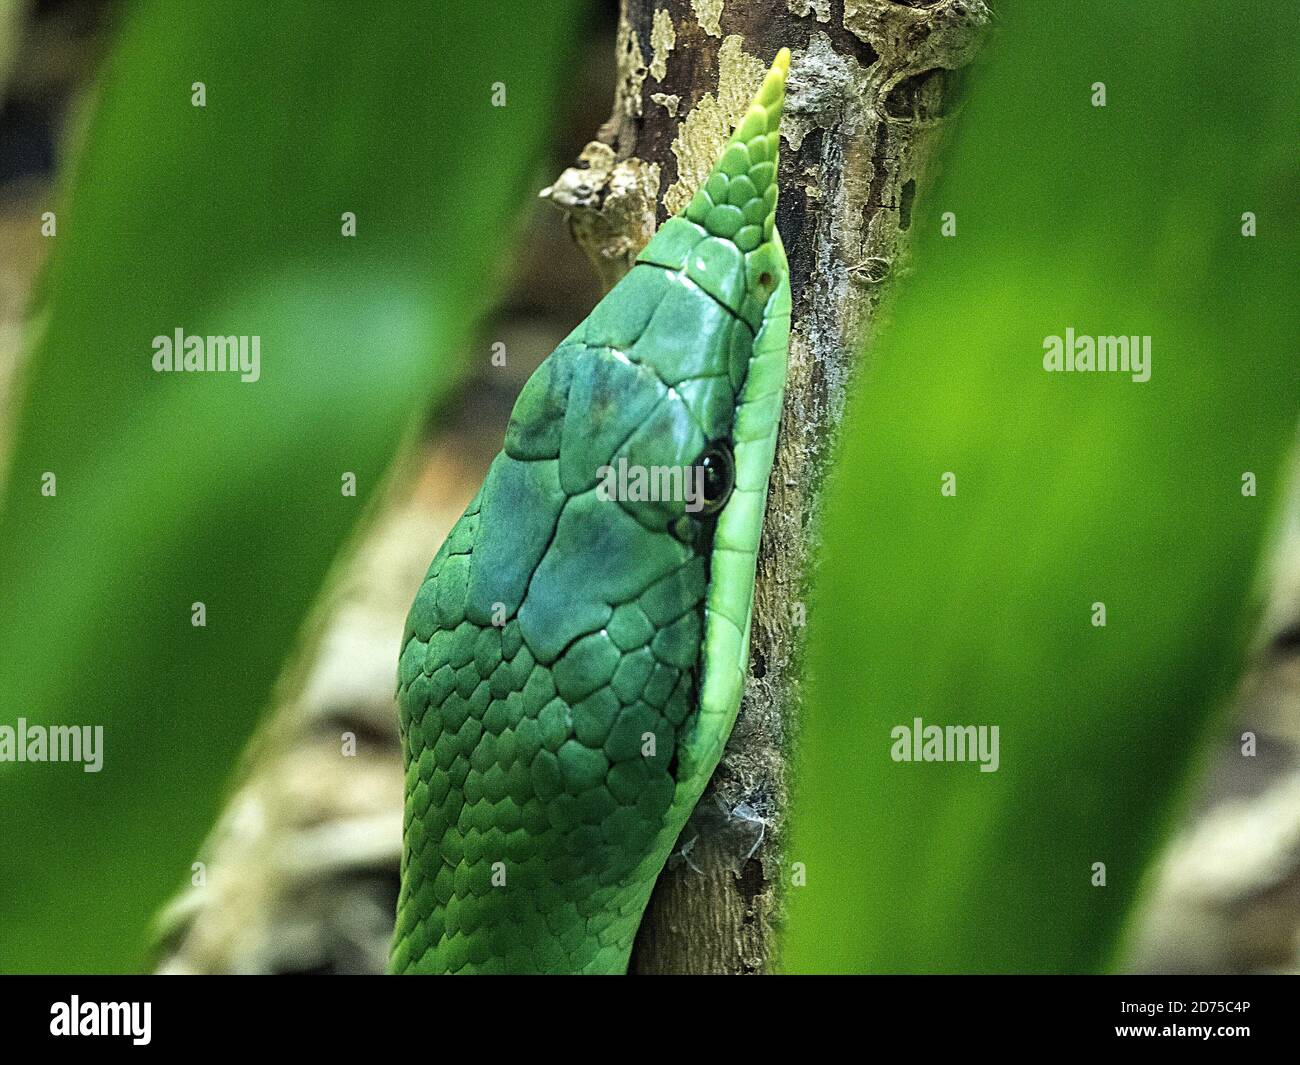 Funny snake close up with a long pointed nose Stock Photo